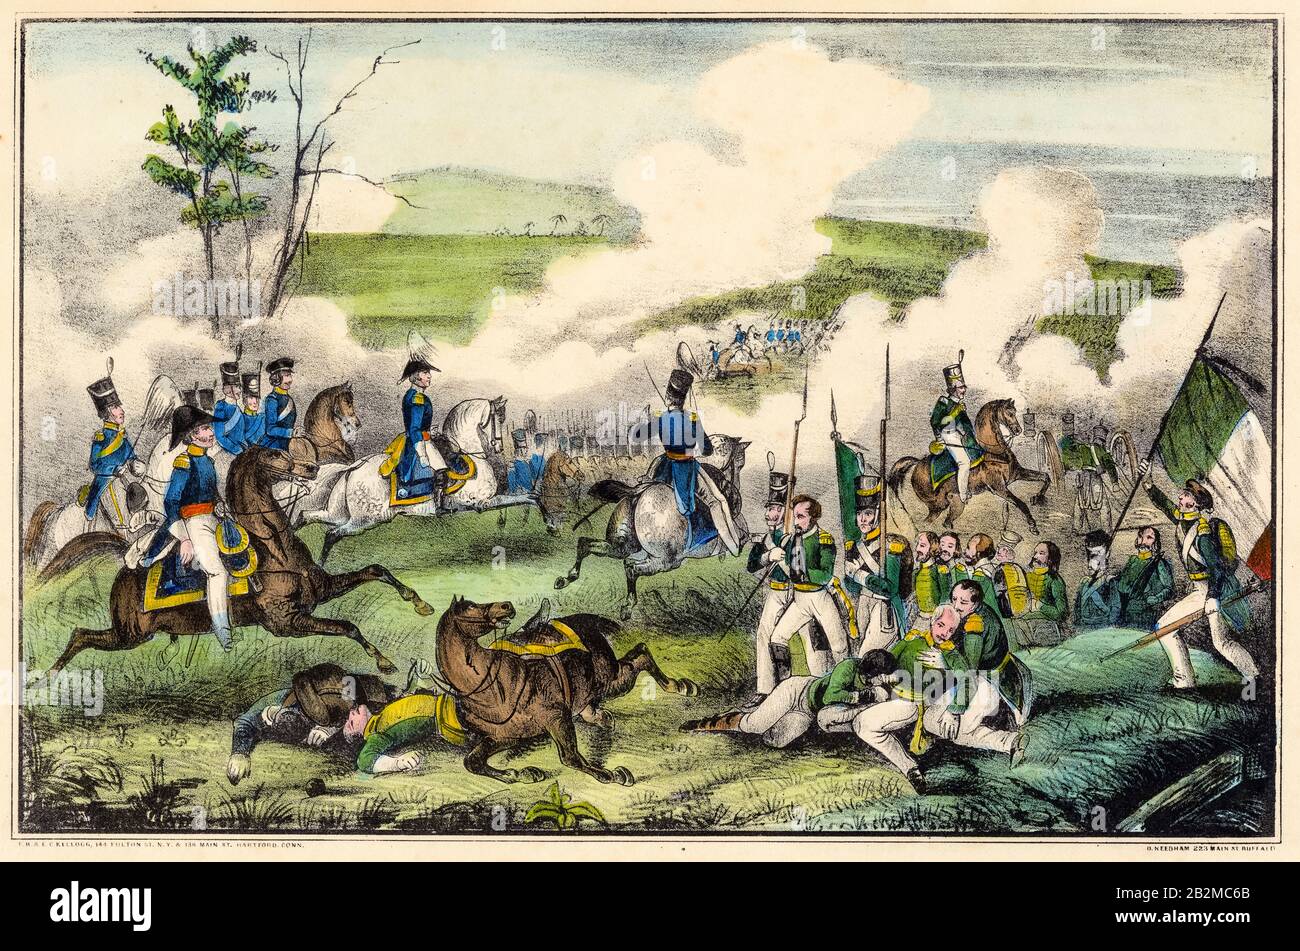 Battle of Palo Alto, May 8th 1846, during the Mexican-American War (1846-1848), print by EB & EC Kellogg, D Needham, 1846 Stock Photo